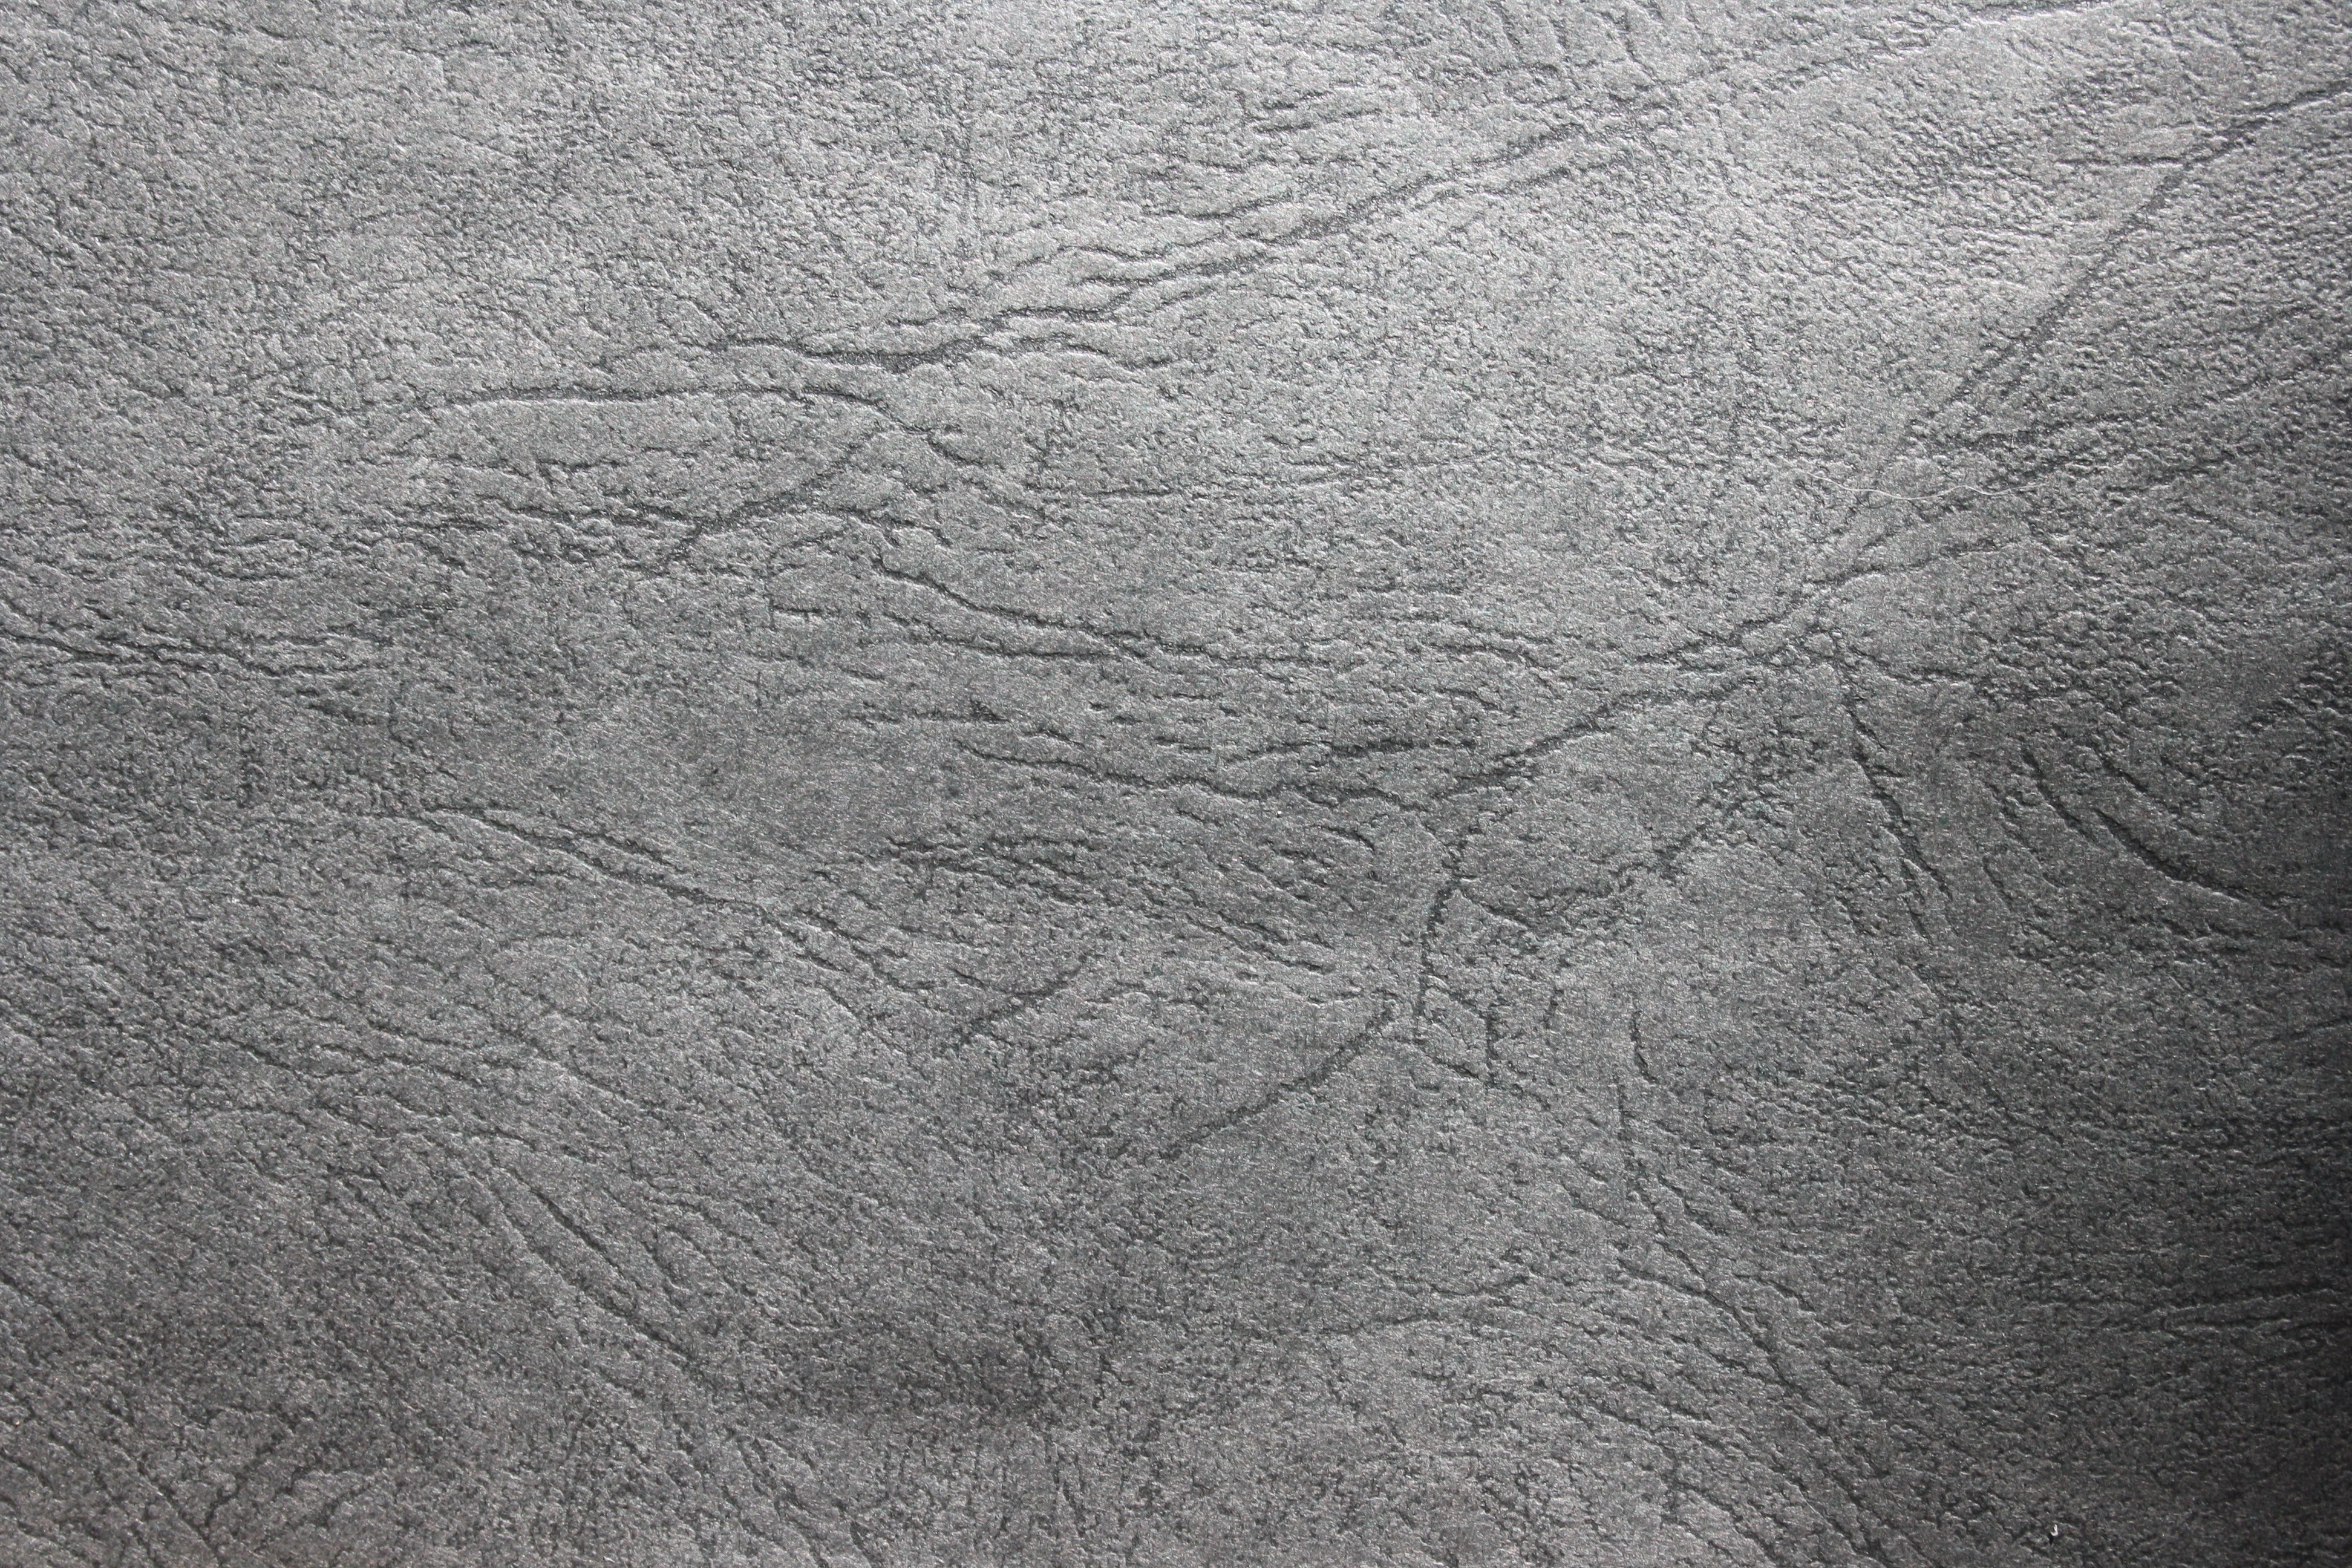 Gray Faux Leather Texture Picture, Free Photograph